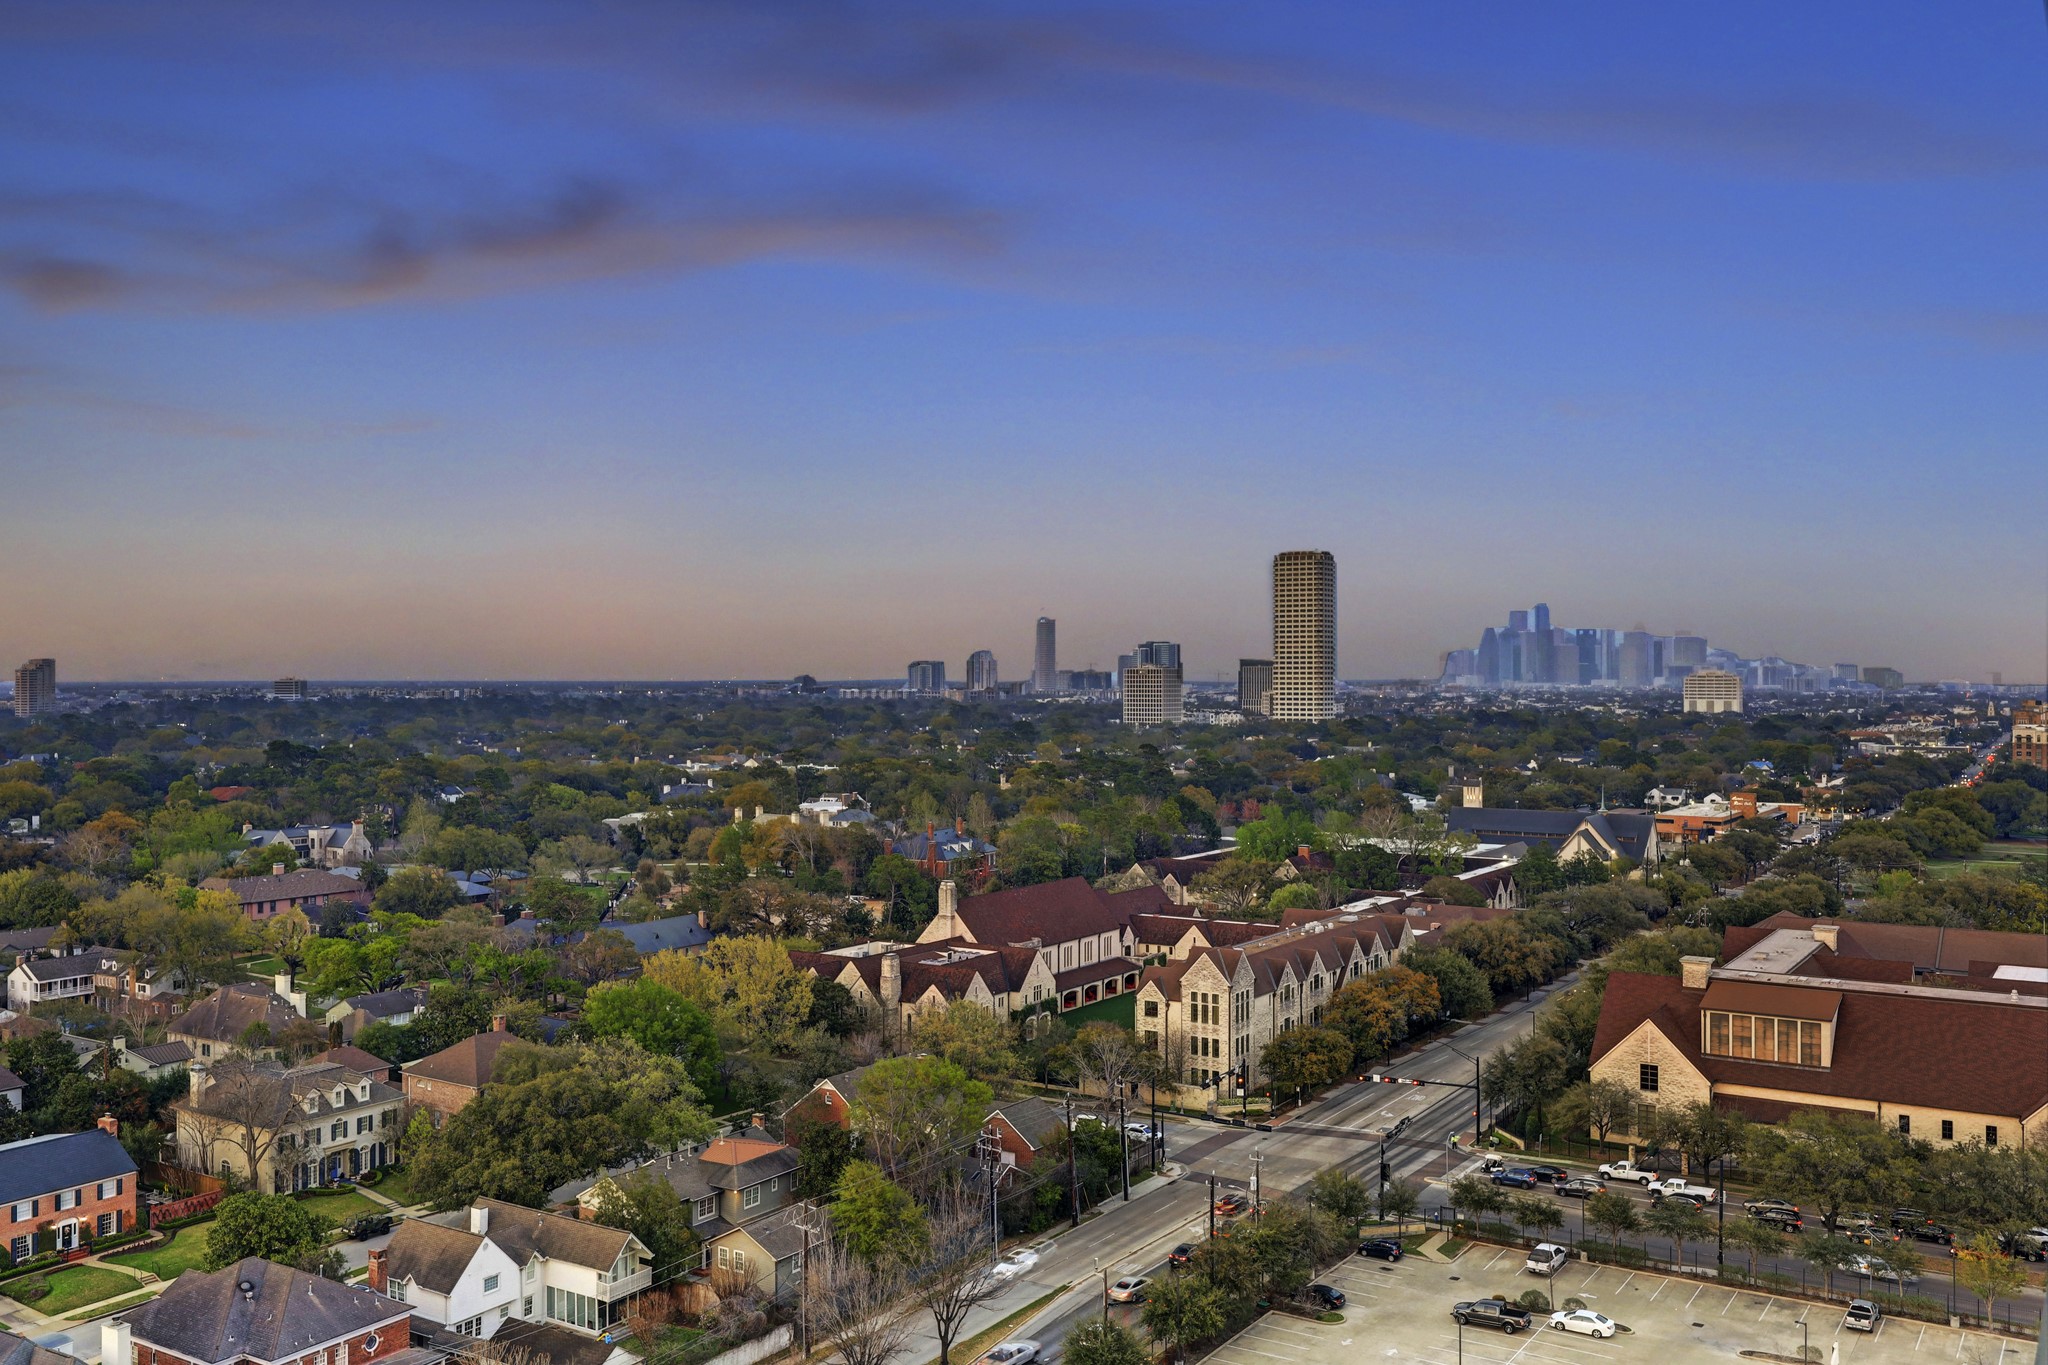 The views from the covered terraces of the residence are unparallelled.  This view is to the east, looking over St. John's School, the River Oaks neighborhood, toward the Houston Central Business District.